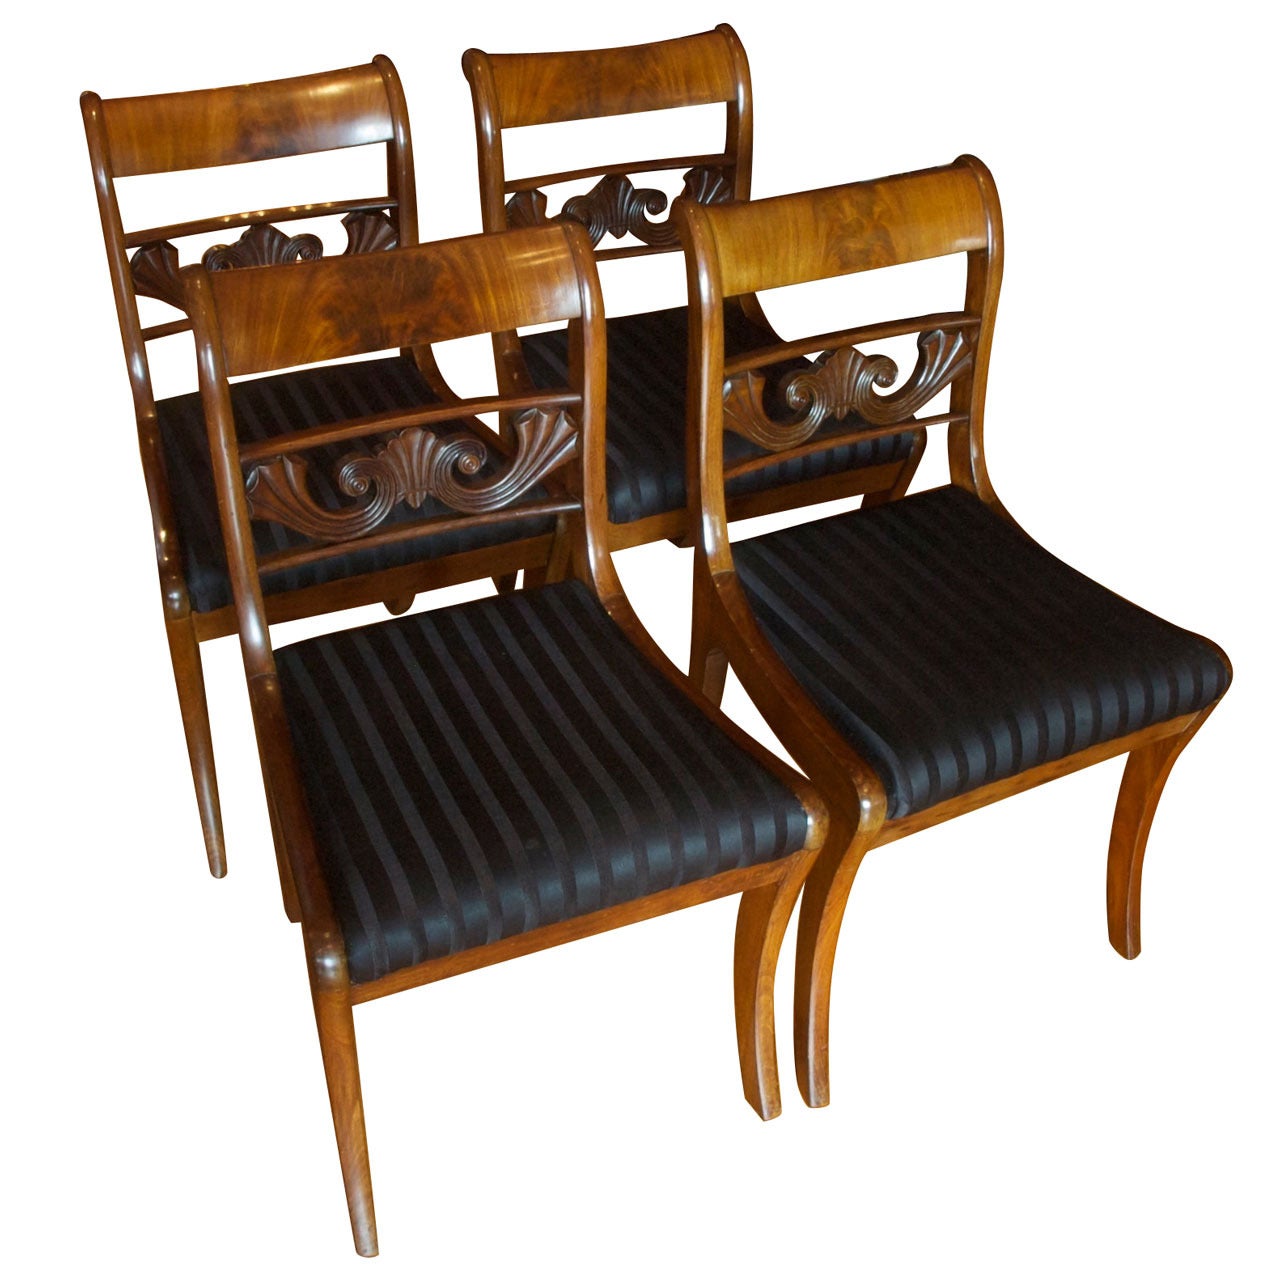 Set of Four Antique Regency Saber Leg Dining Chairs in Mahogany, circa 1830